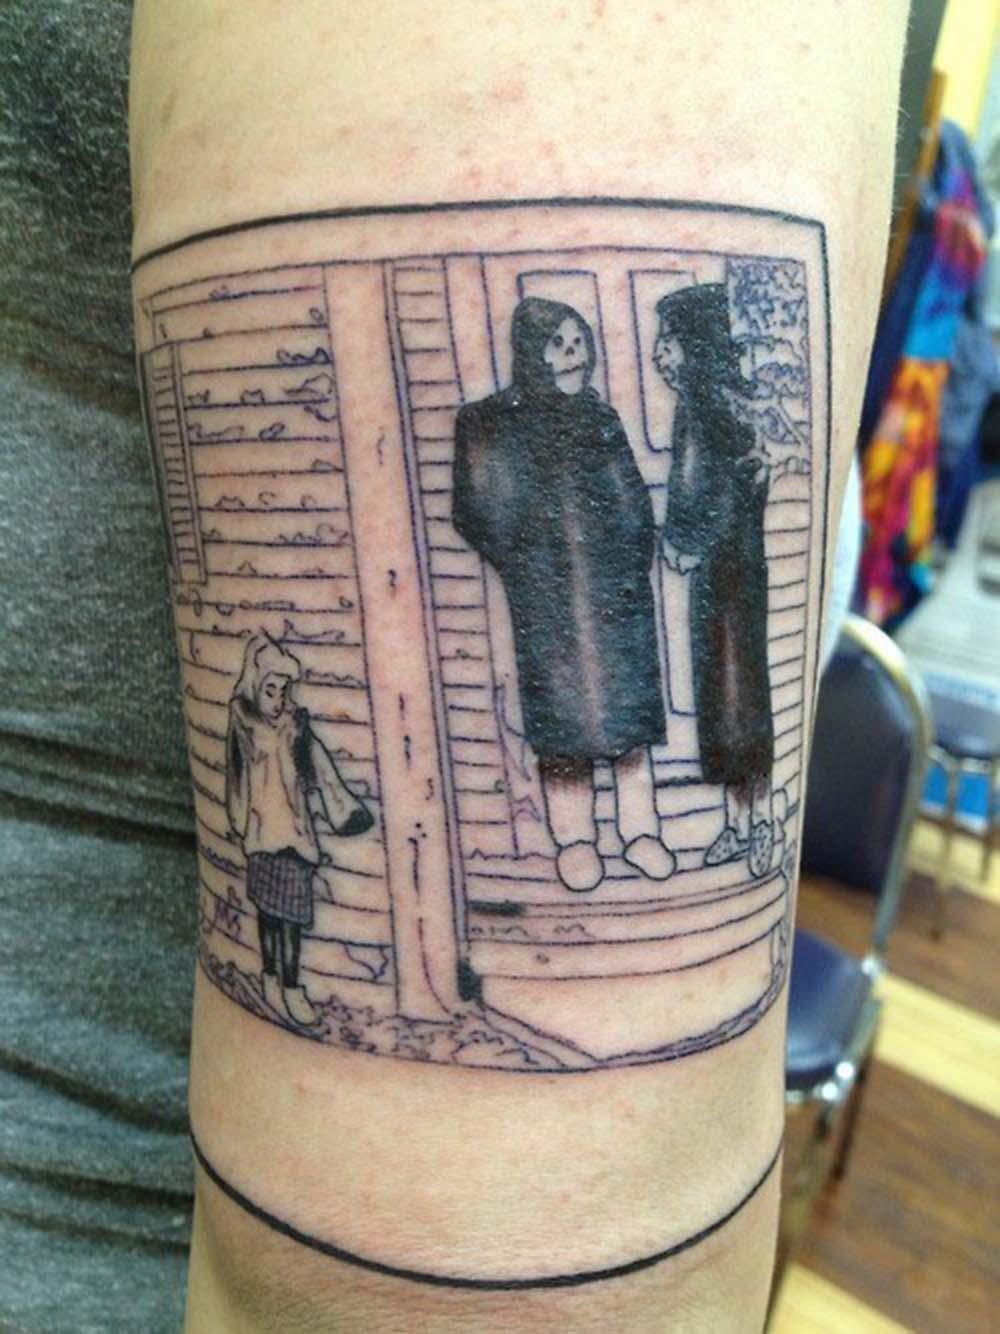 dario fernandez recommends The Devil And God Are Raging Inside Me Tattoo